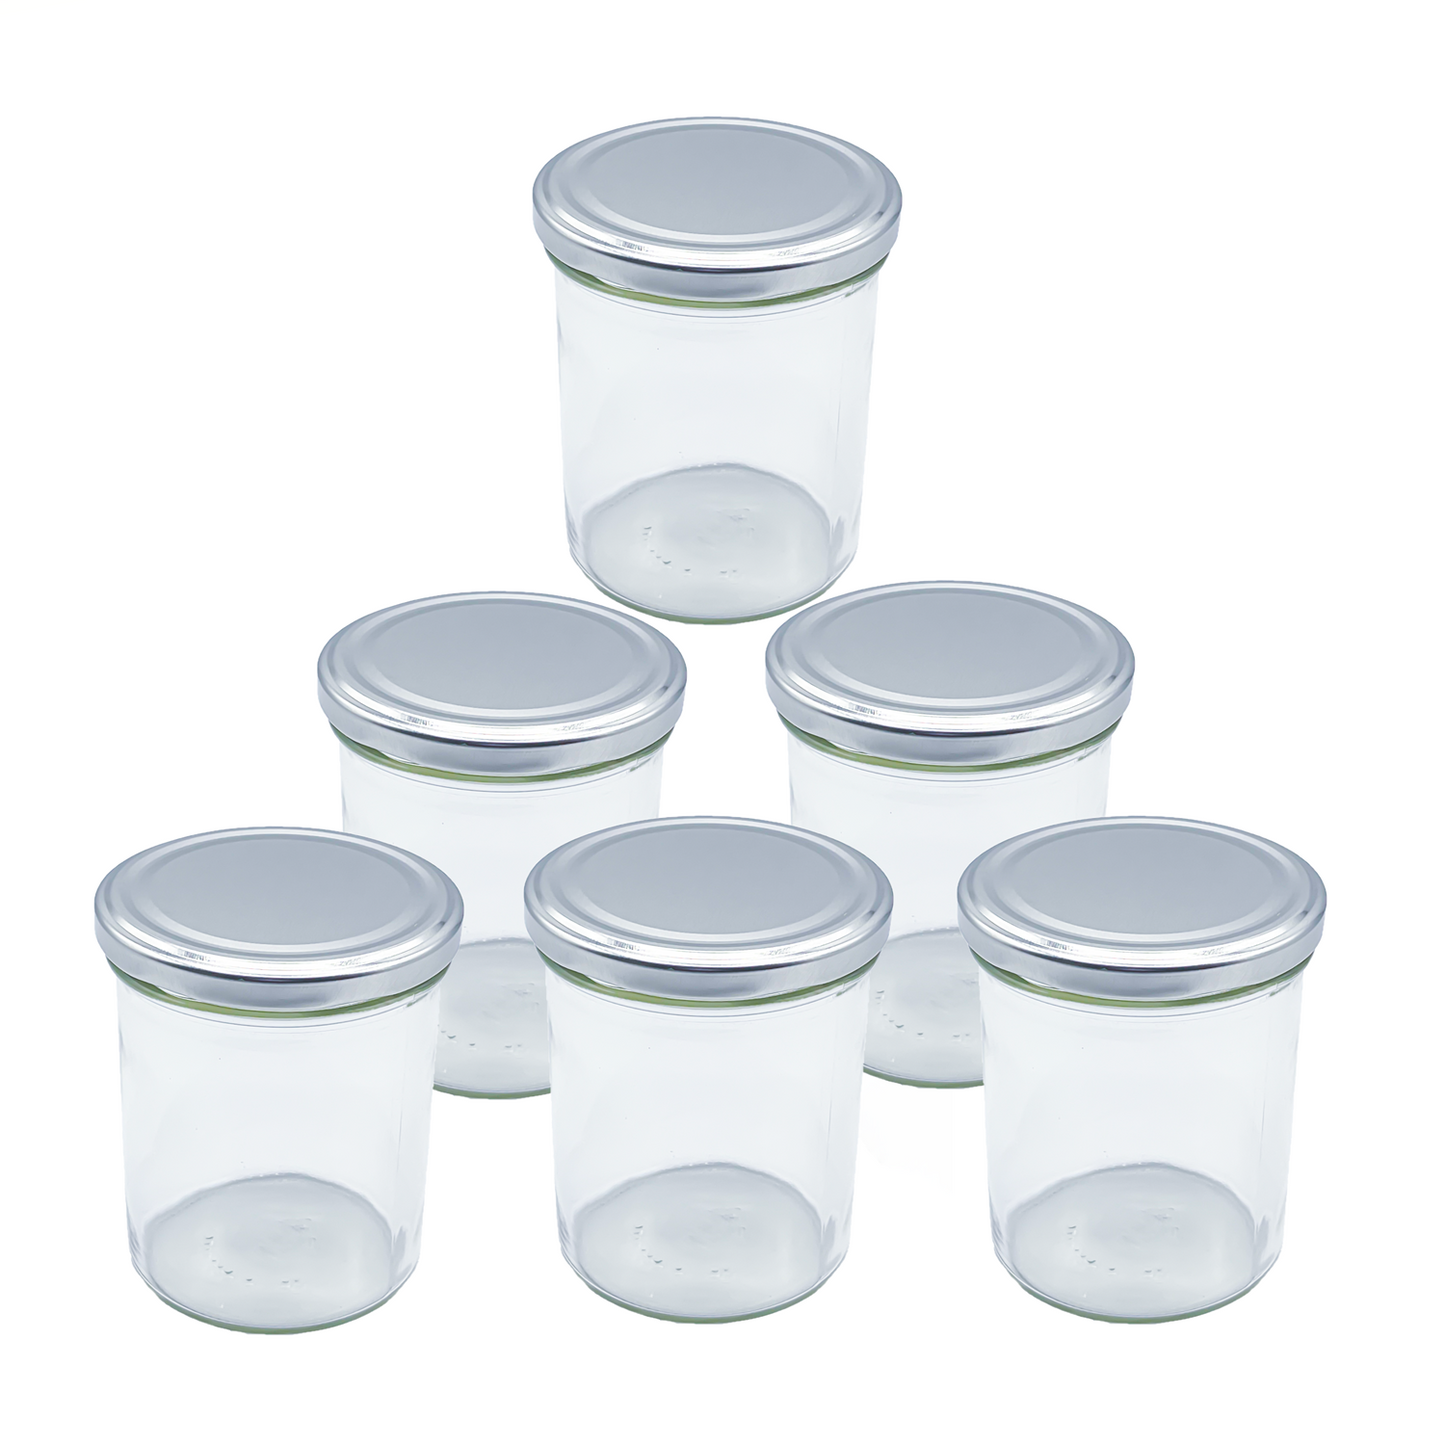 435ml Glass Food Jars with Silver Lids Perfect for Preserving Honey, Jam, Chutney, Nuts, Pickles- 6 Pack